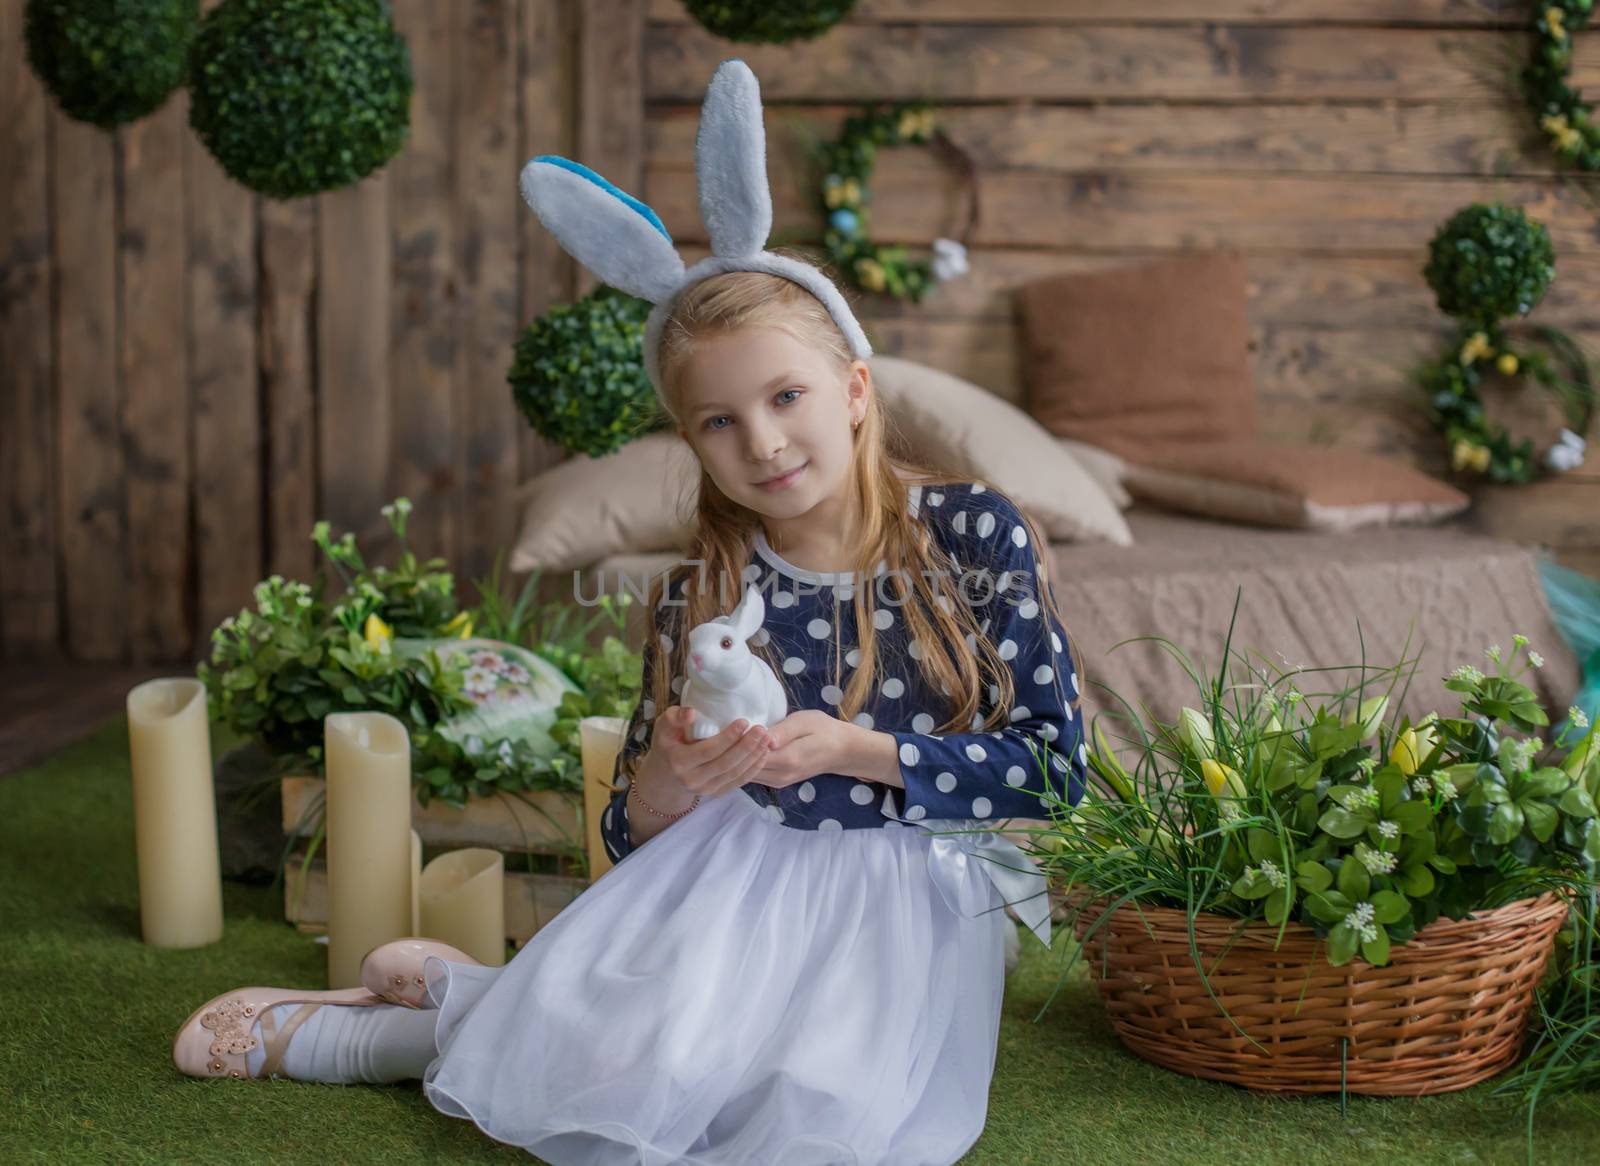 Funny portrait of girl having fun on Easter wearing bunny ears and holding eggs on eyes during spring season